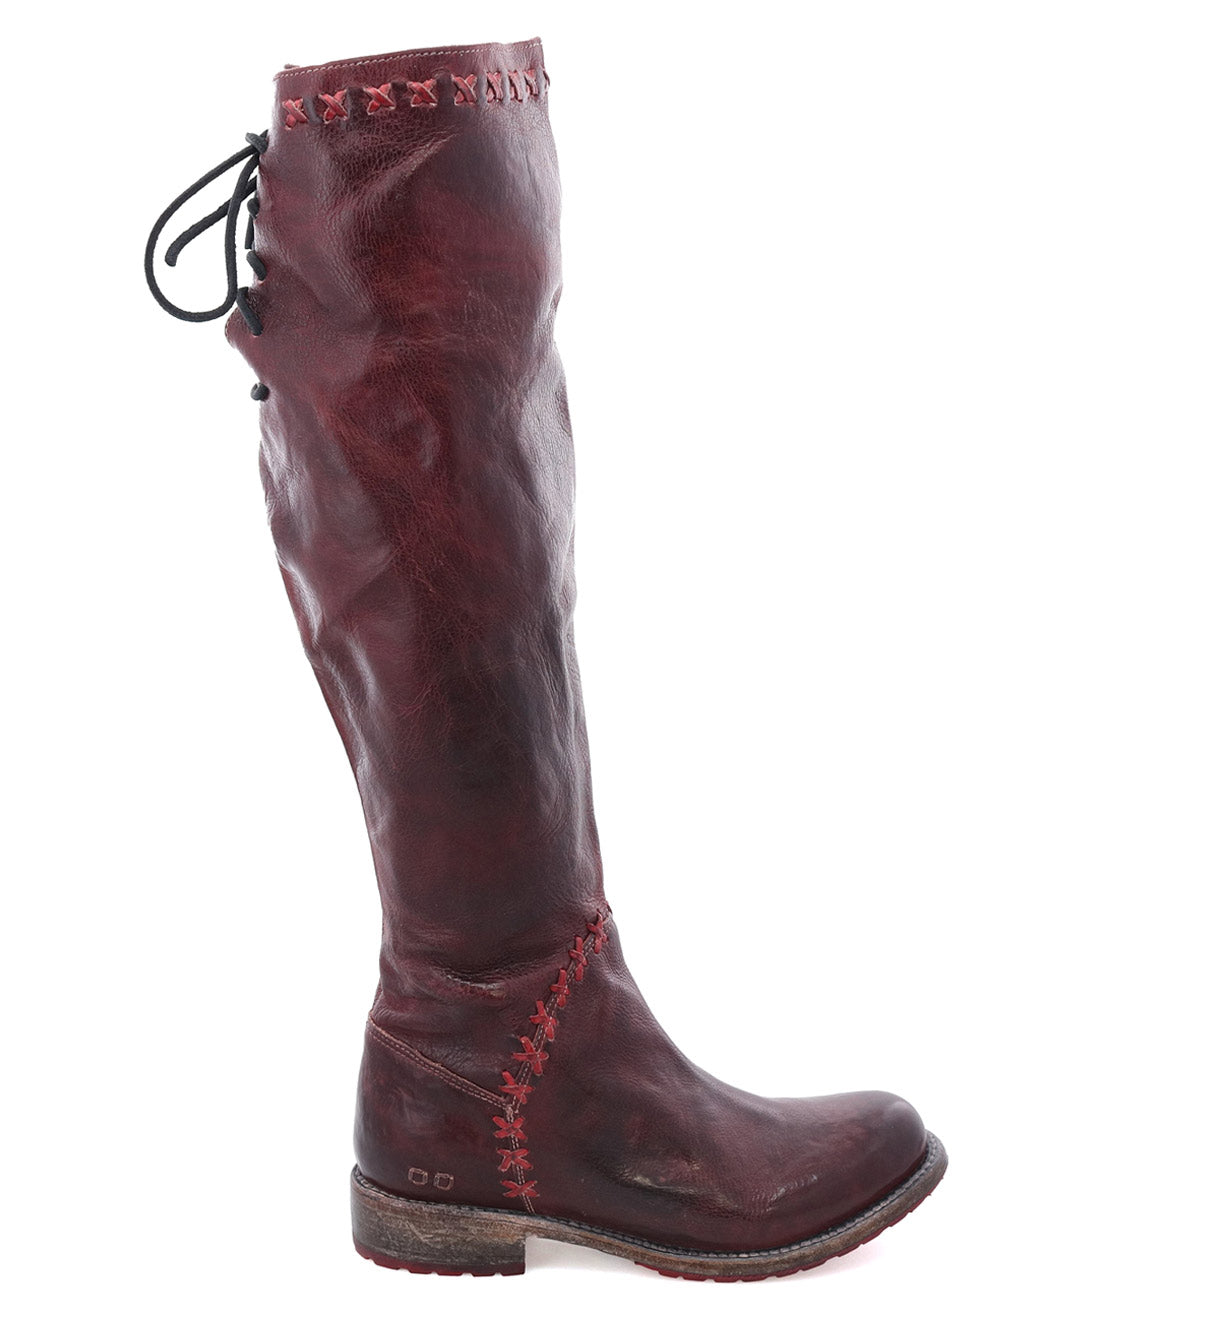 A women's Bed Stu Manchester III burgundy leather knee high boot.